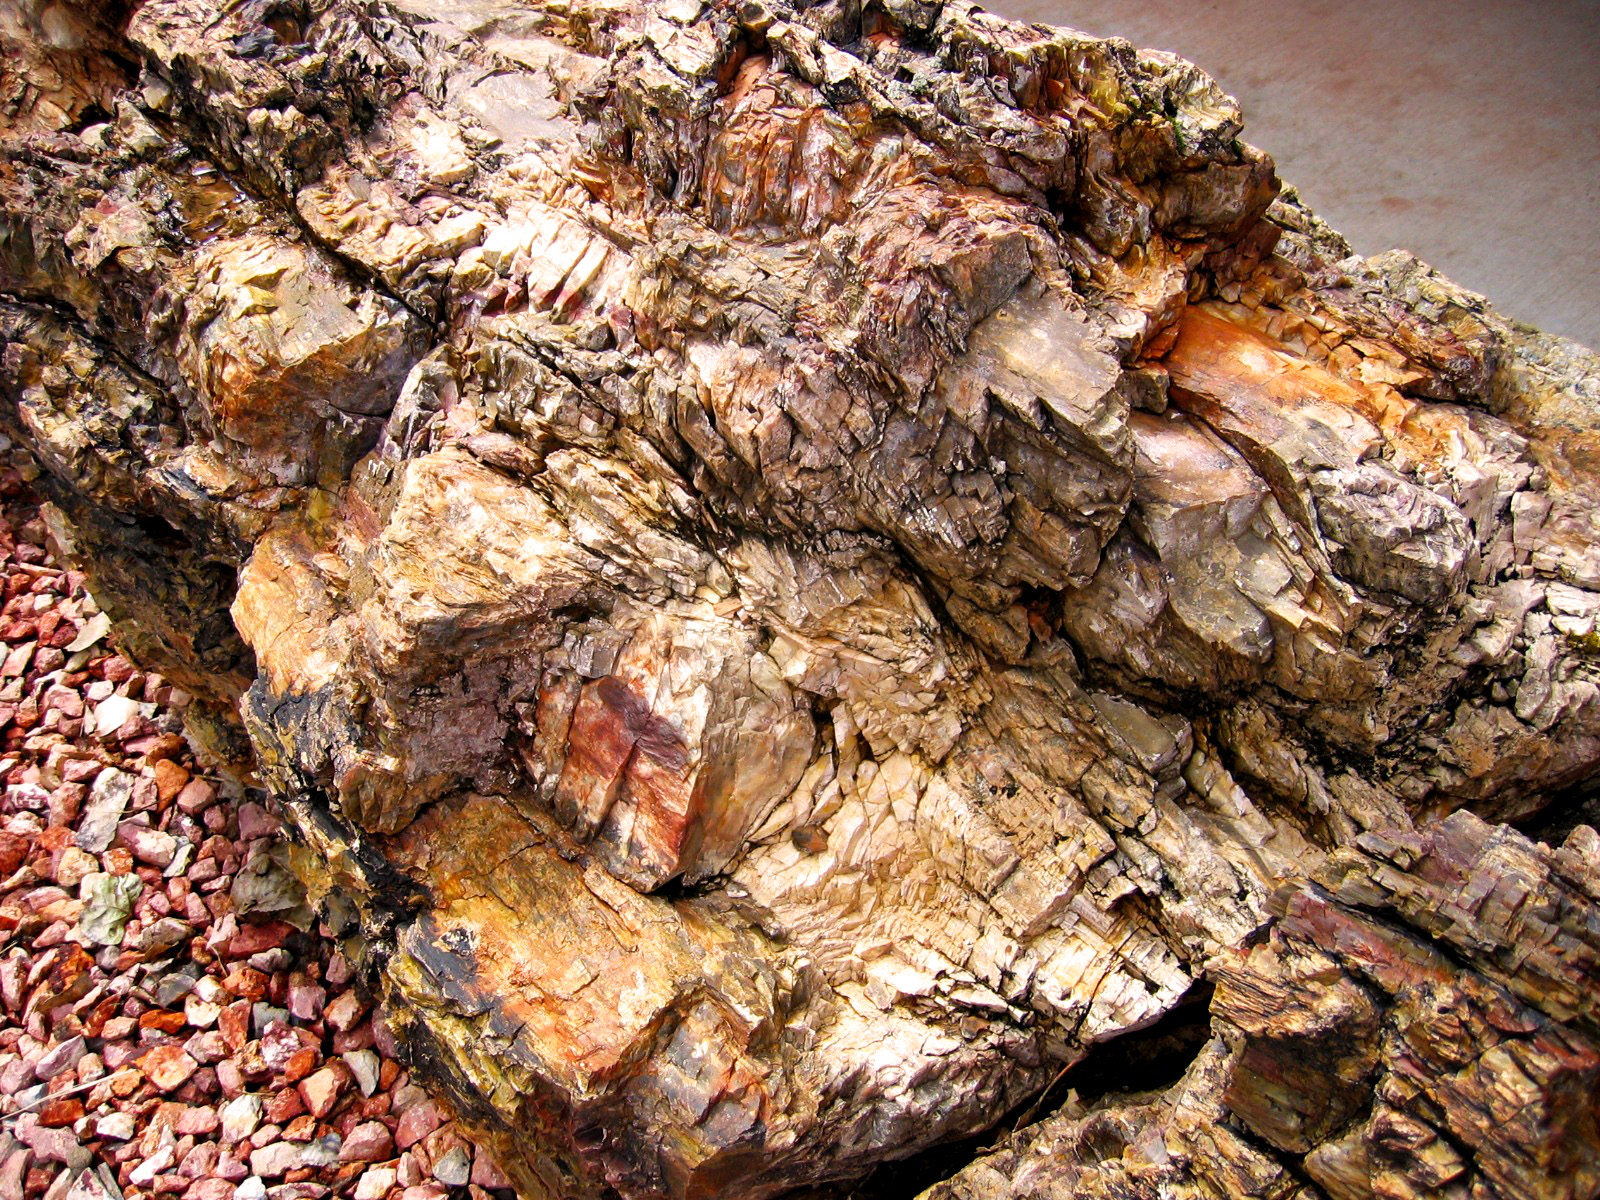 Petrified wood can be found spread throughout the whole park. 